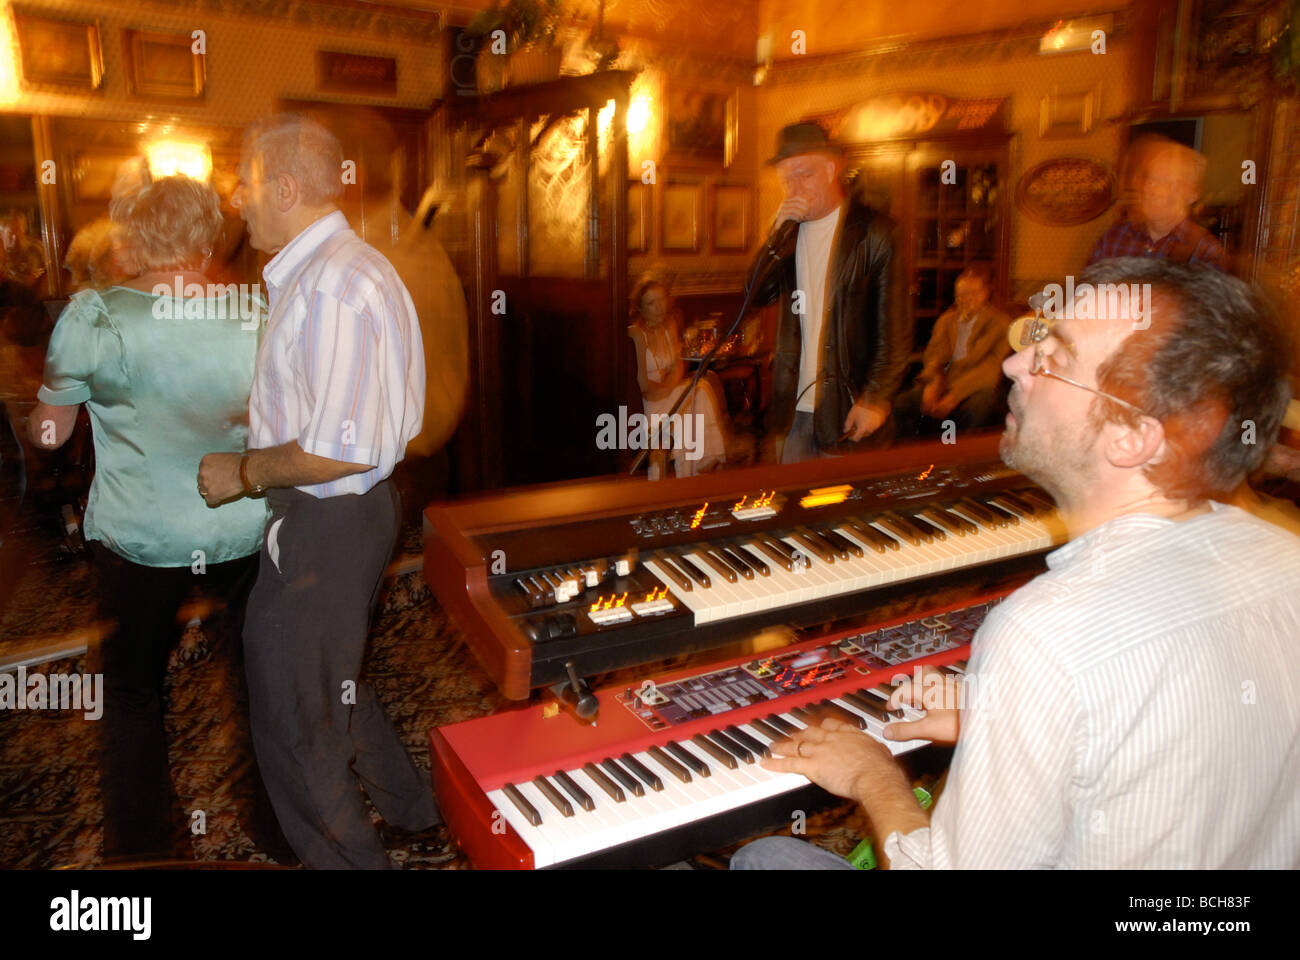 dancing and entertainment inTraditional English pub Stock Photo